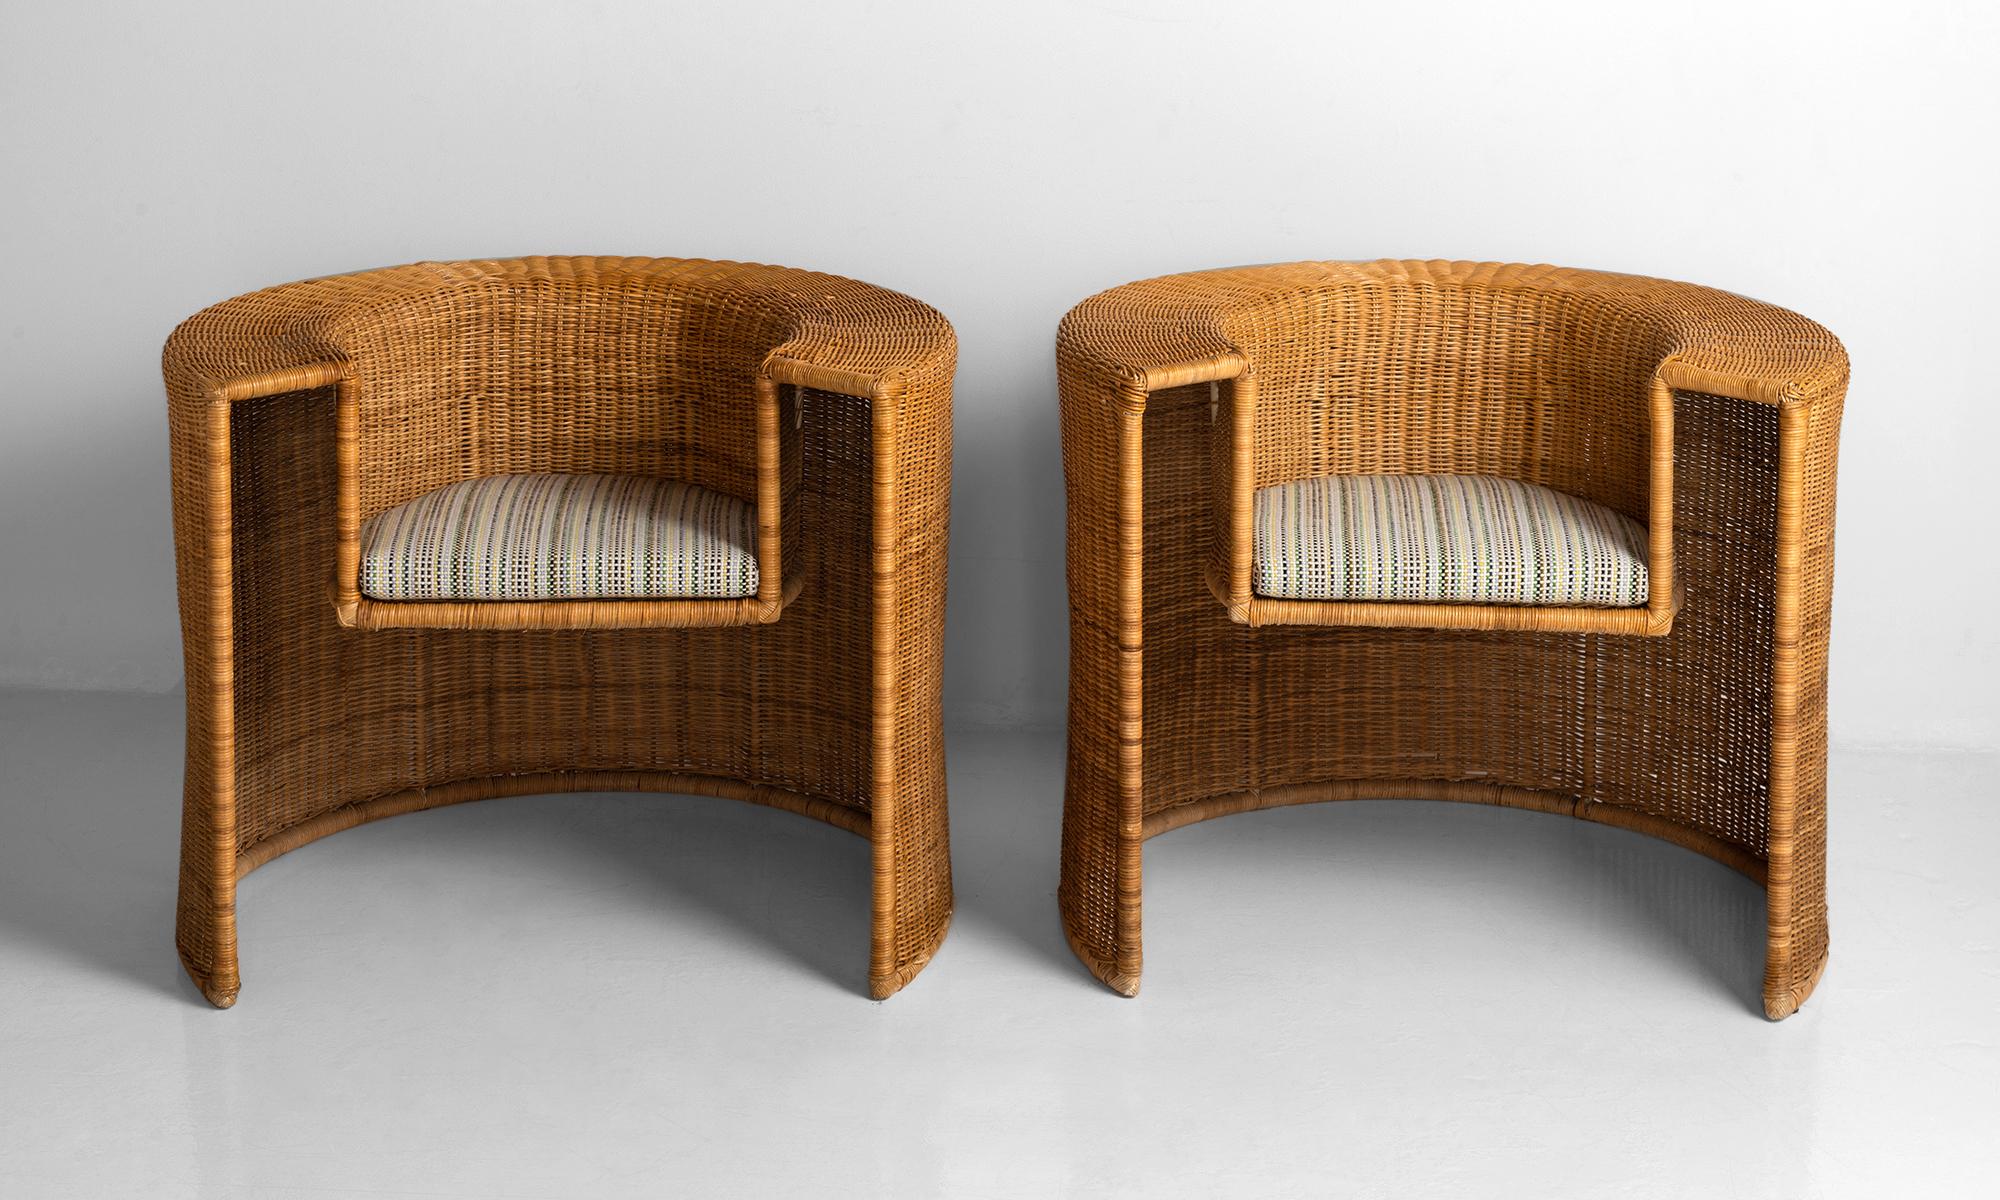 Pair of wicker tub chairs, France, circa 1950.

Unique pair of wicker armchairs with newly upholstered cushion in Maharam fabric.